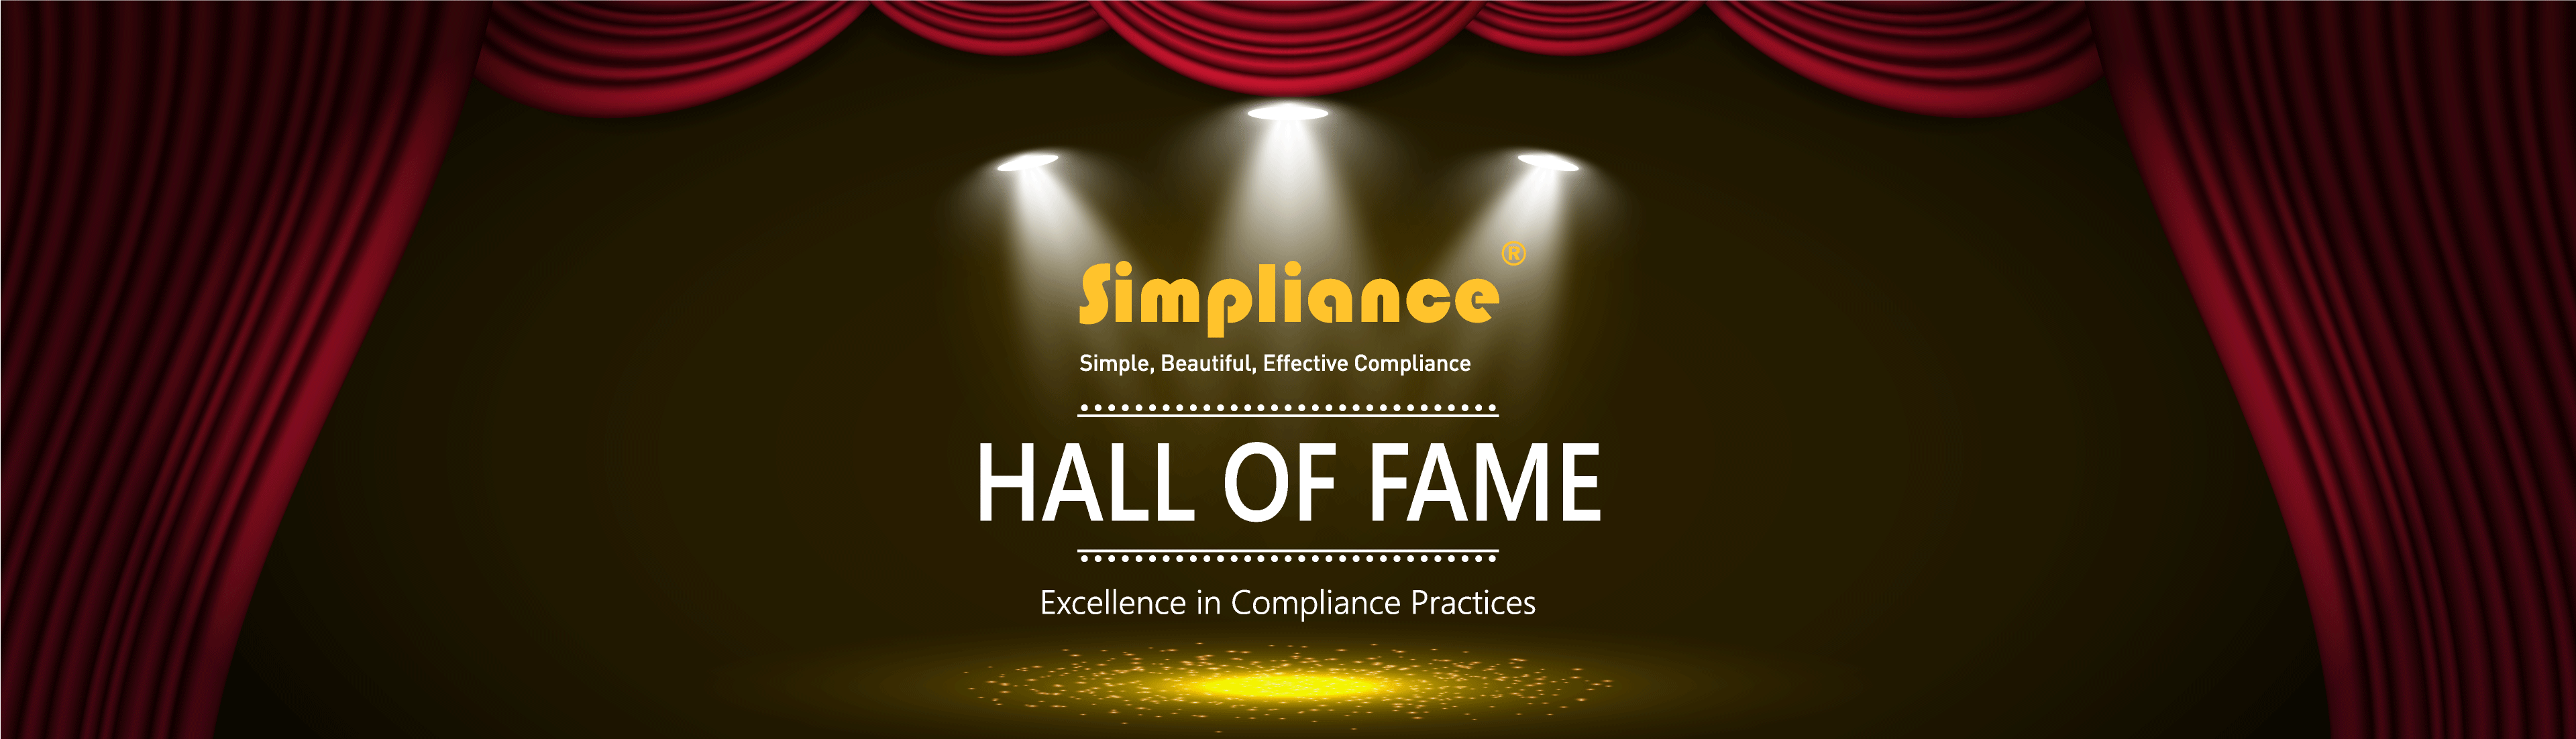 Simpliance hall of fame